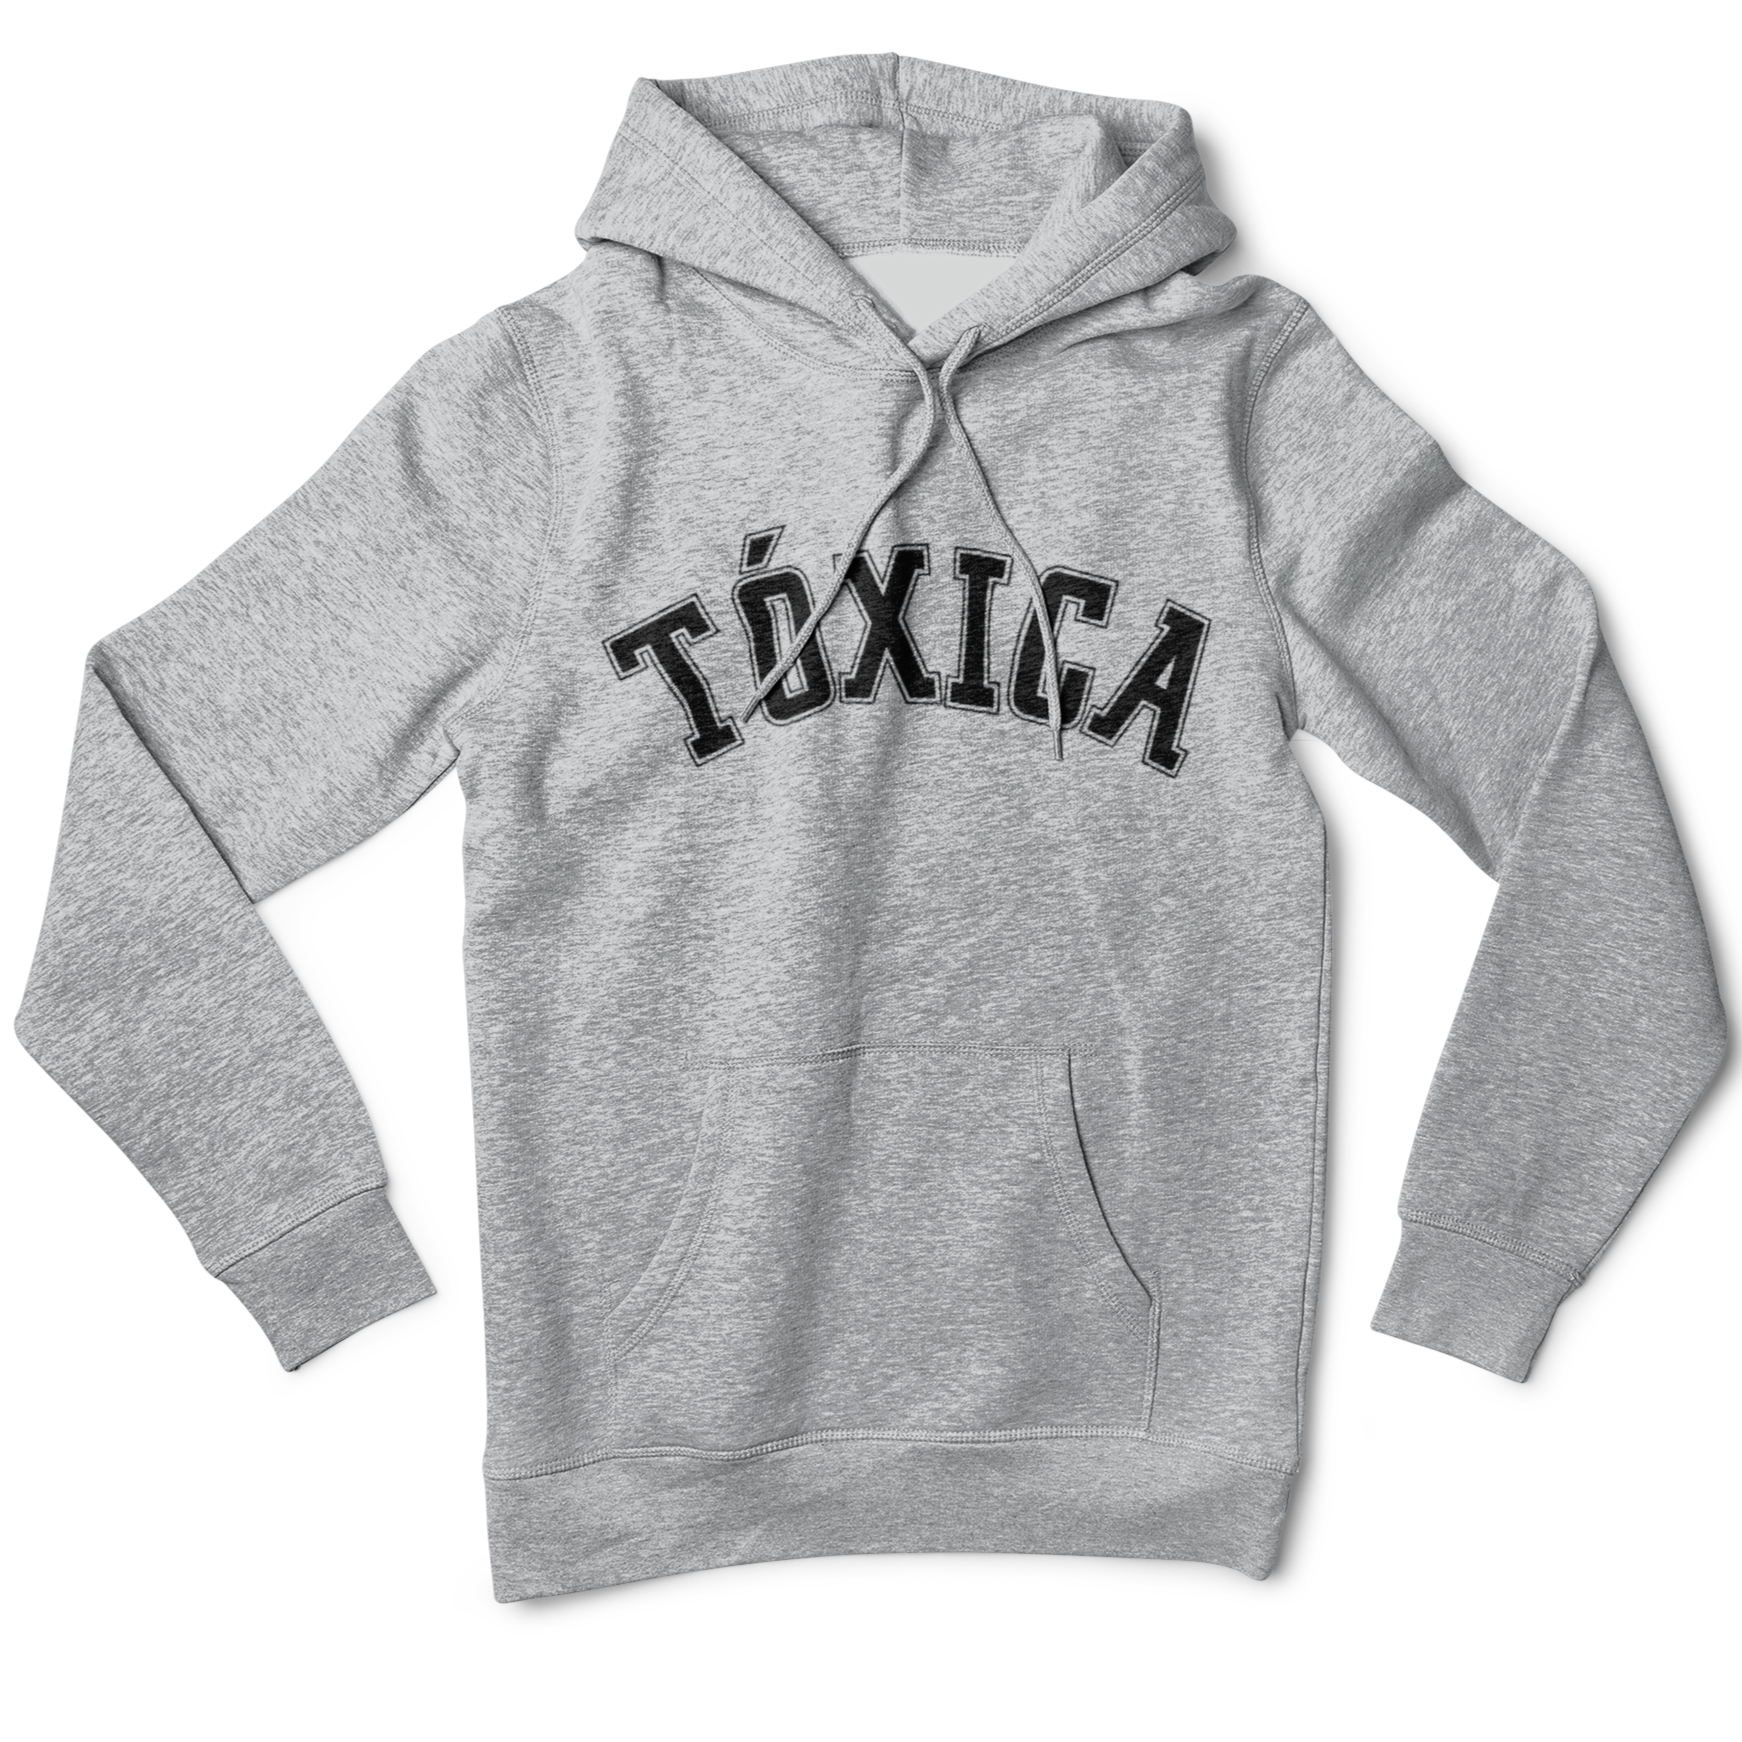 Spanish grey hoodie sweatshirt for Latina women with the word 'Toxica' written in black vasity lettering